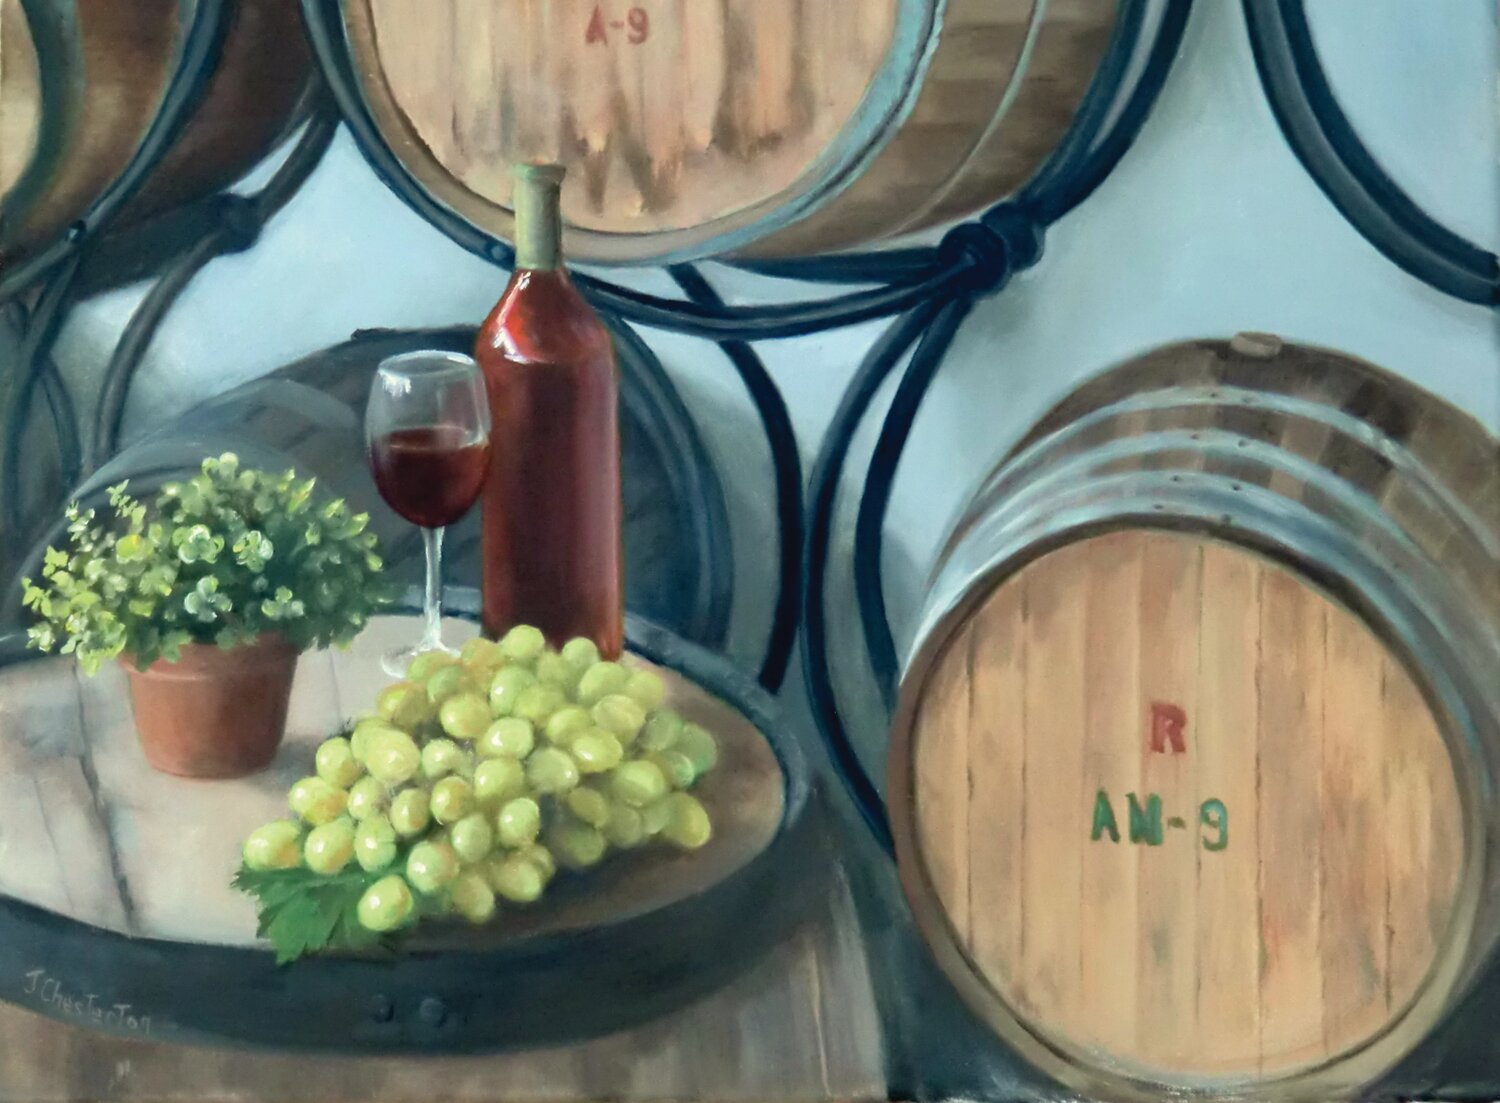 “Crossing Barrels,” from Crossing Vineyards is an oil painting by Jeanne Chesterton, on view at Freeman Hall as part of the Arts & Cultural Council’s “Wine & Art Trail Exhibition” on weekends until Oct. 1.